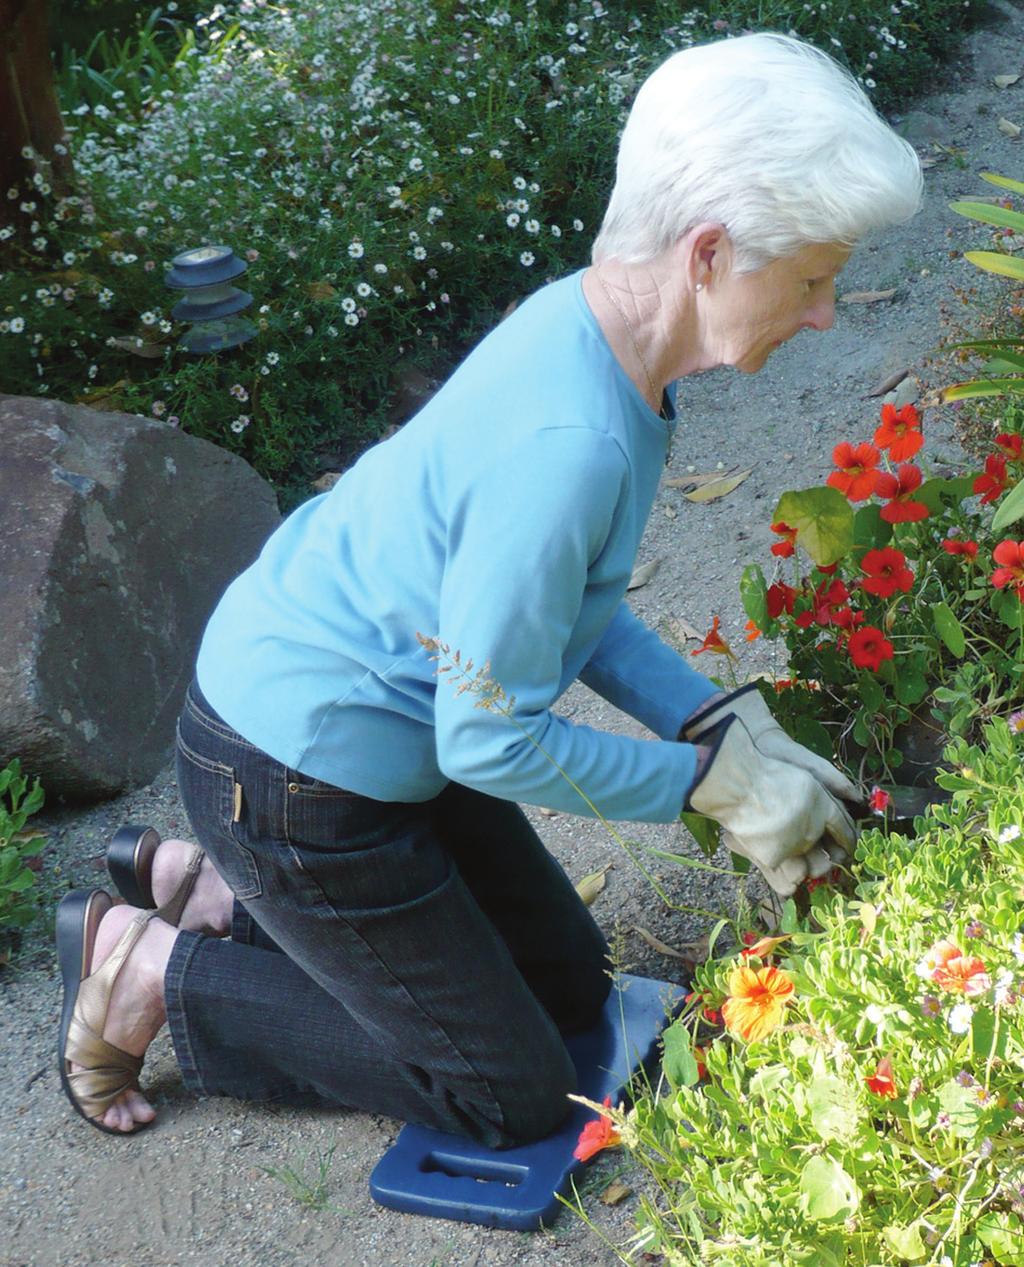 Gardening Use a pad or sit on a small stool to garden.